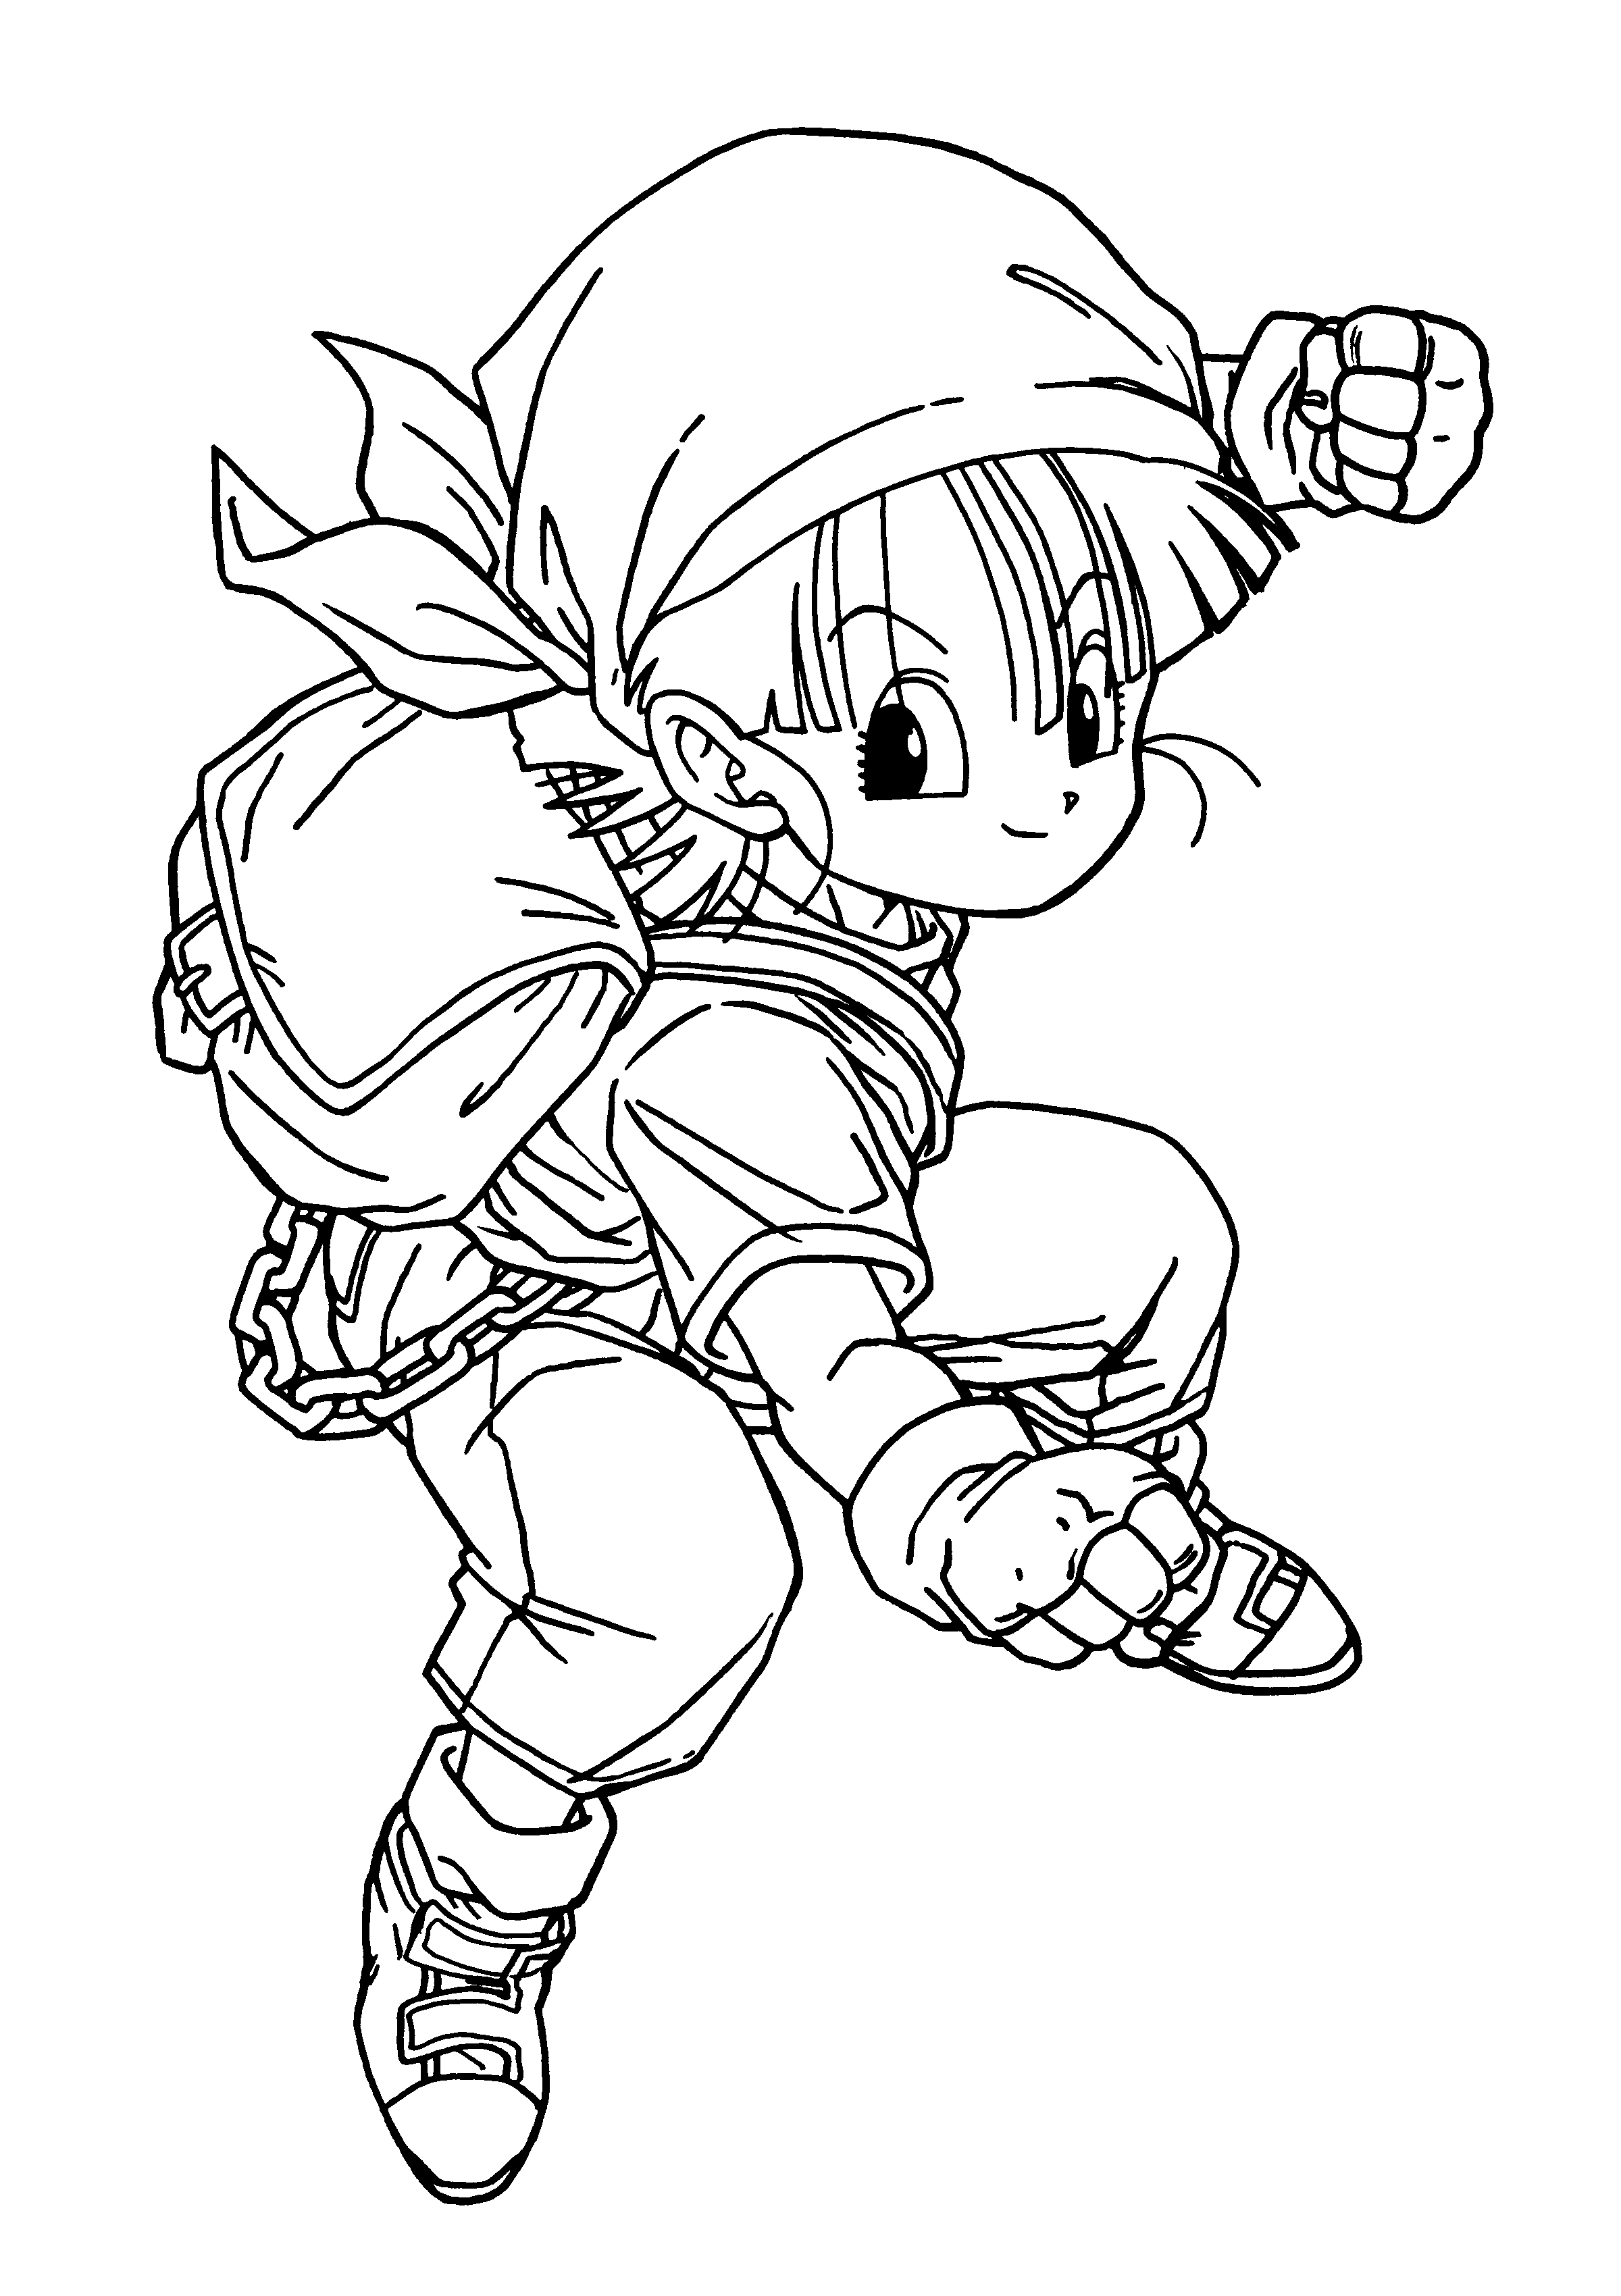 Lovely Bulma Coloring Page - Free Printable Coloring Pages for Kids